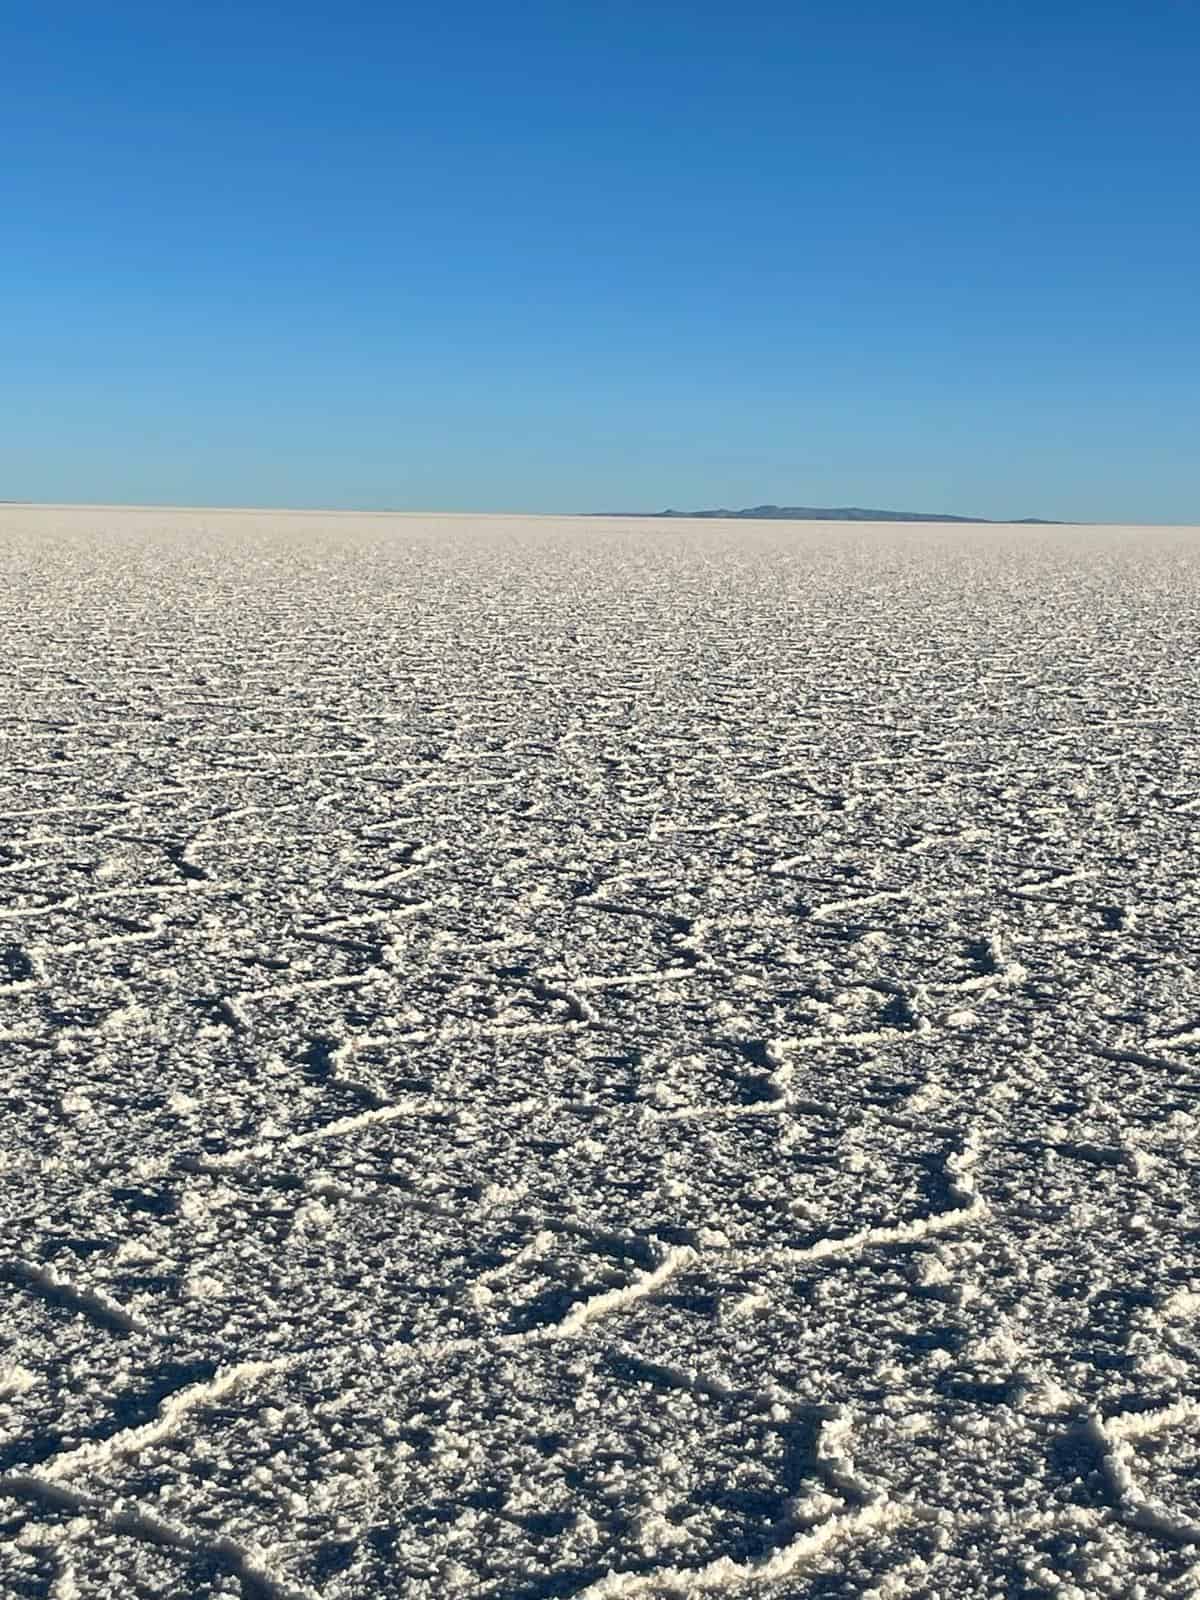 The white salt flats of Uyuni in Bolivia, with a clear blue sky in the background and the silhouette of some mountains in the background